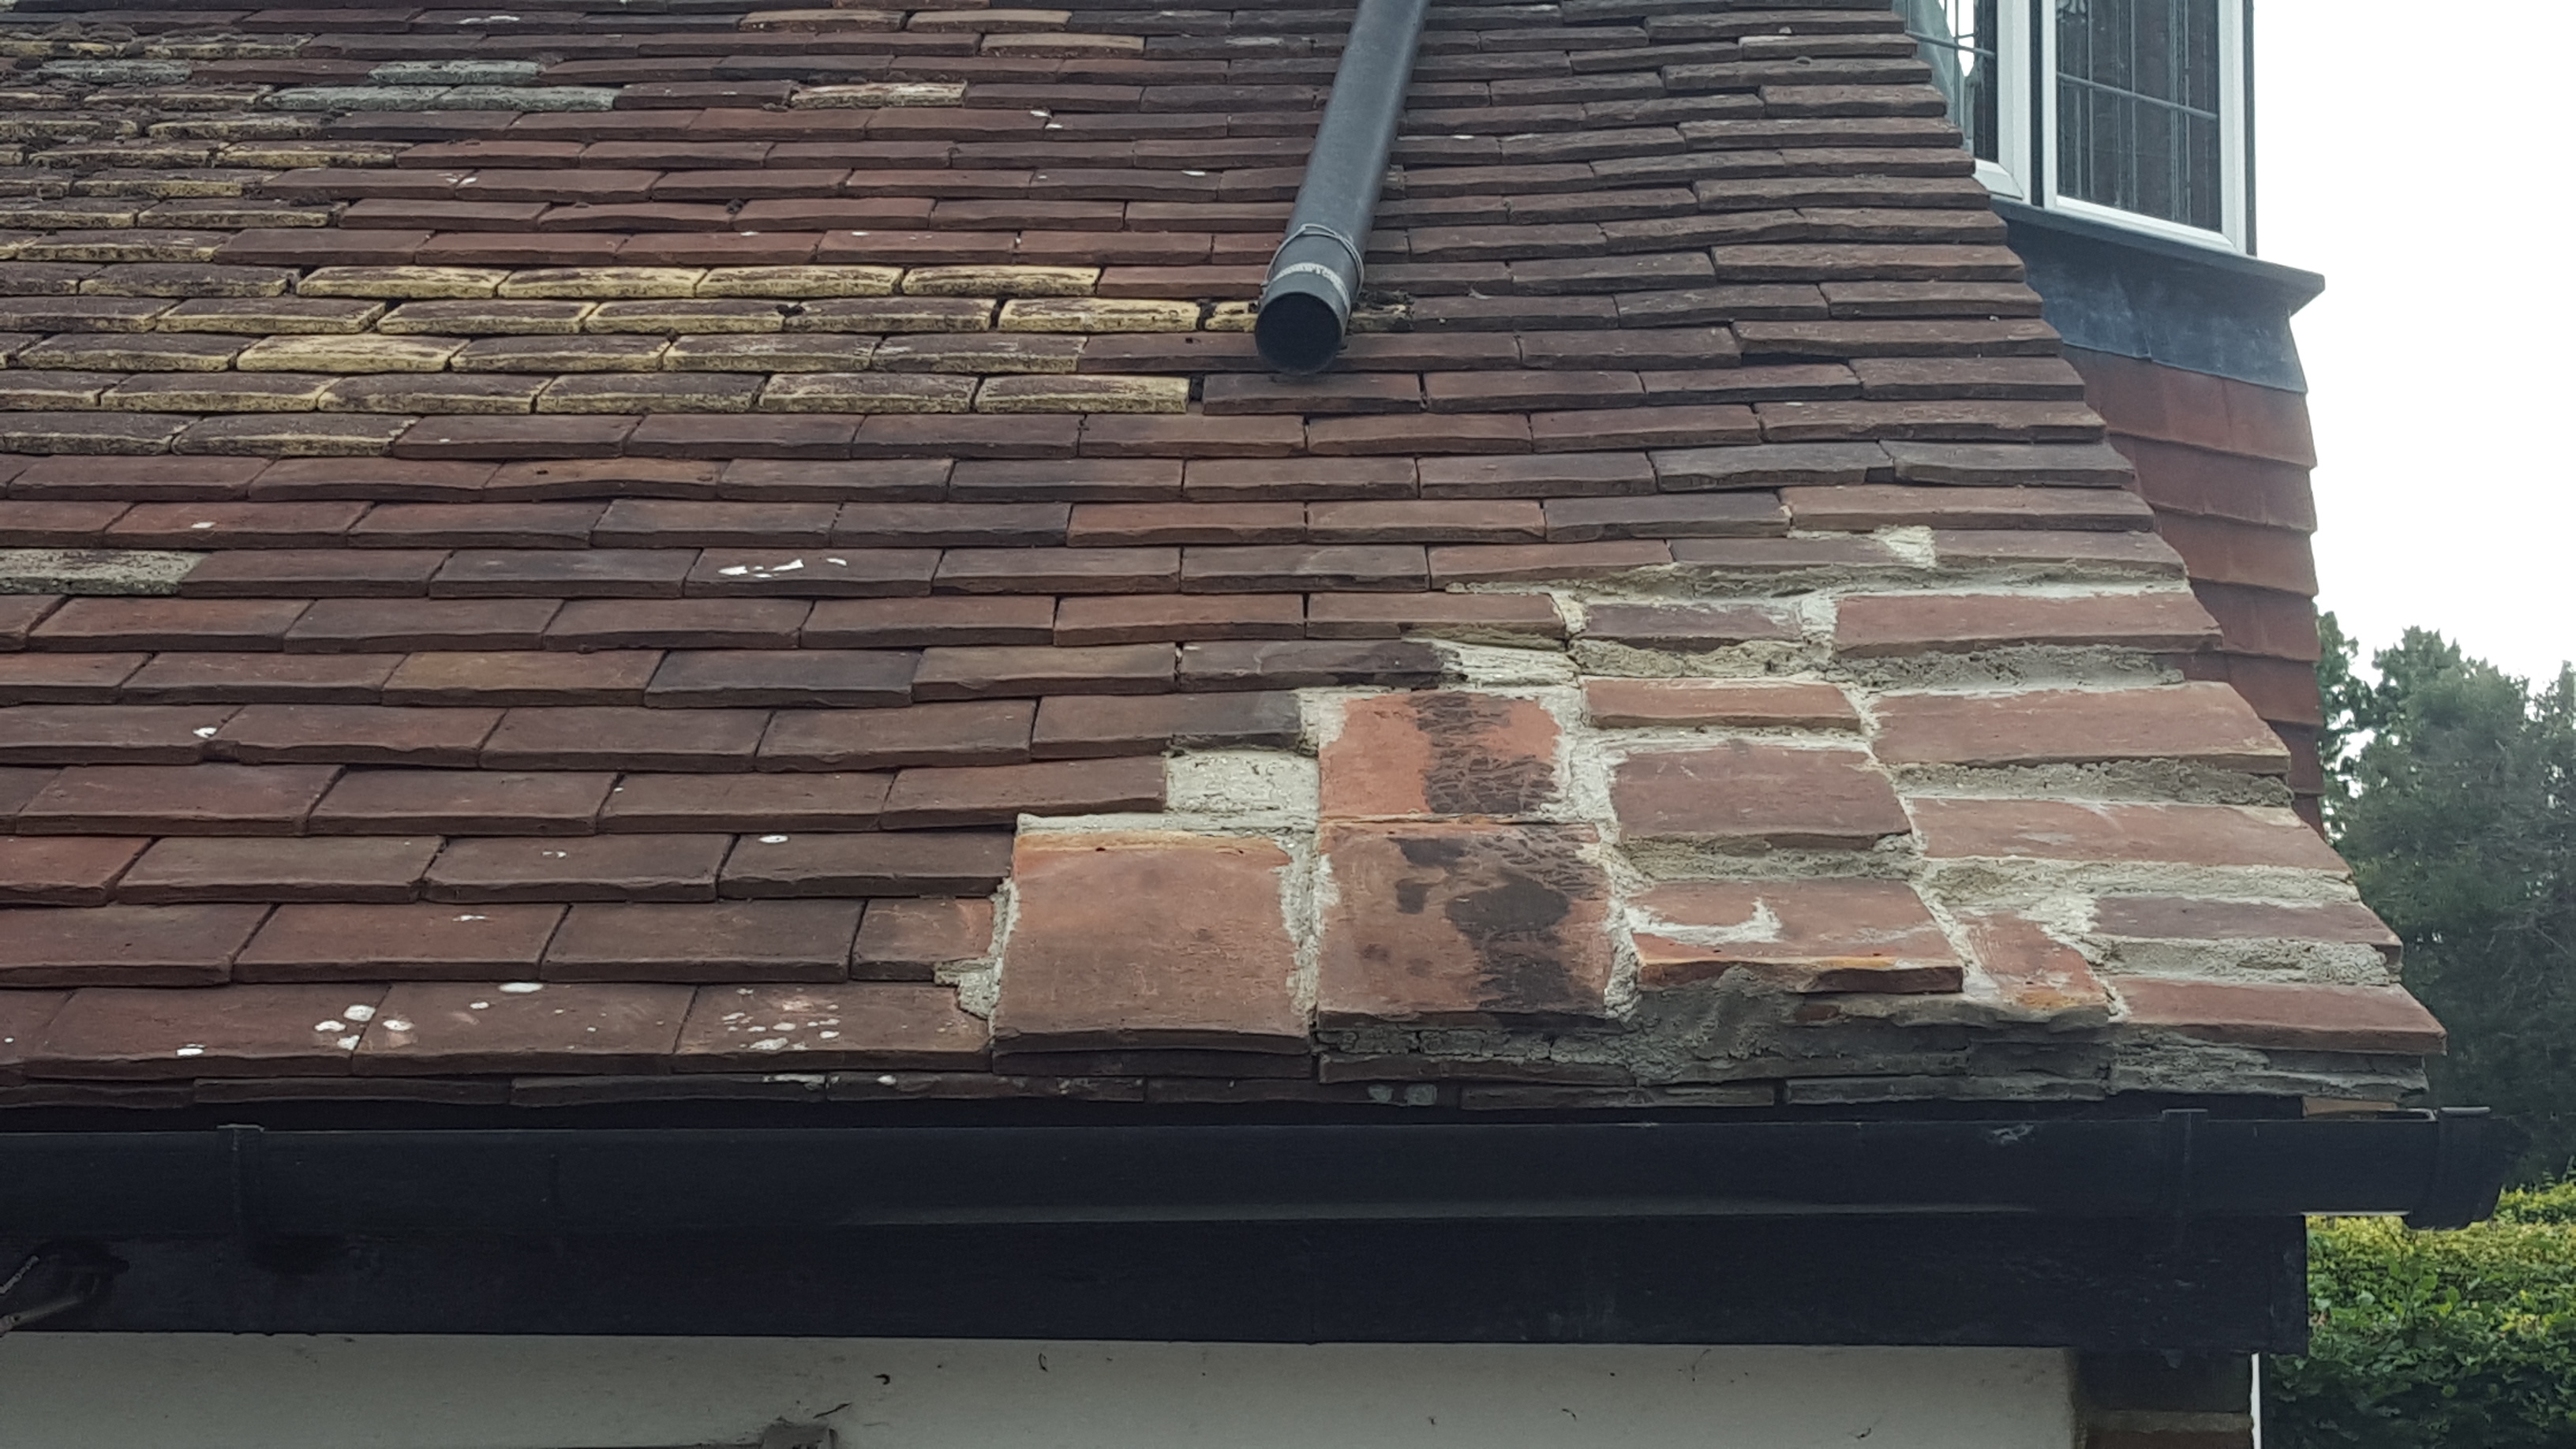 A Perfect Example of When NOT To Cement Tiles - Watchdog Roofing Projects